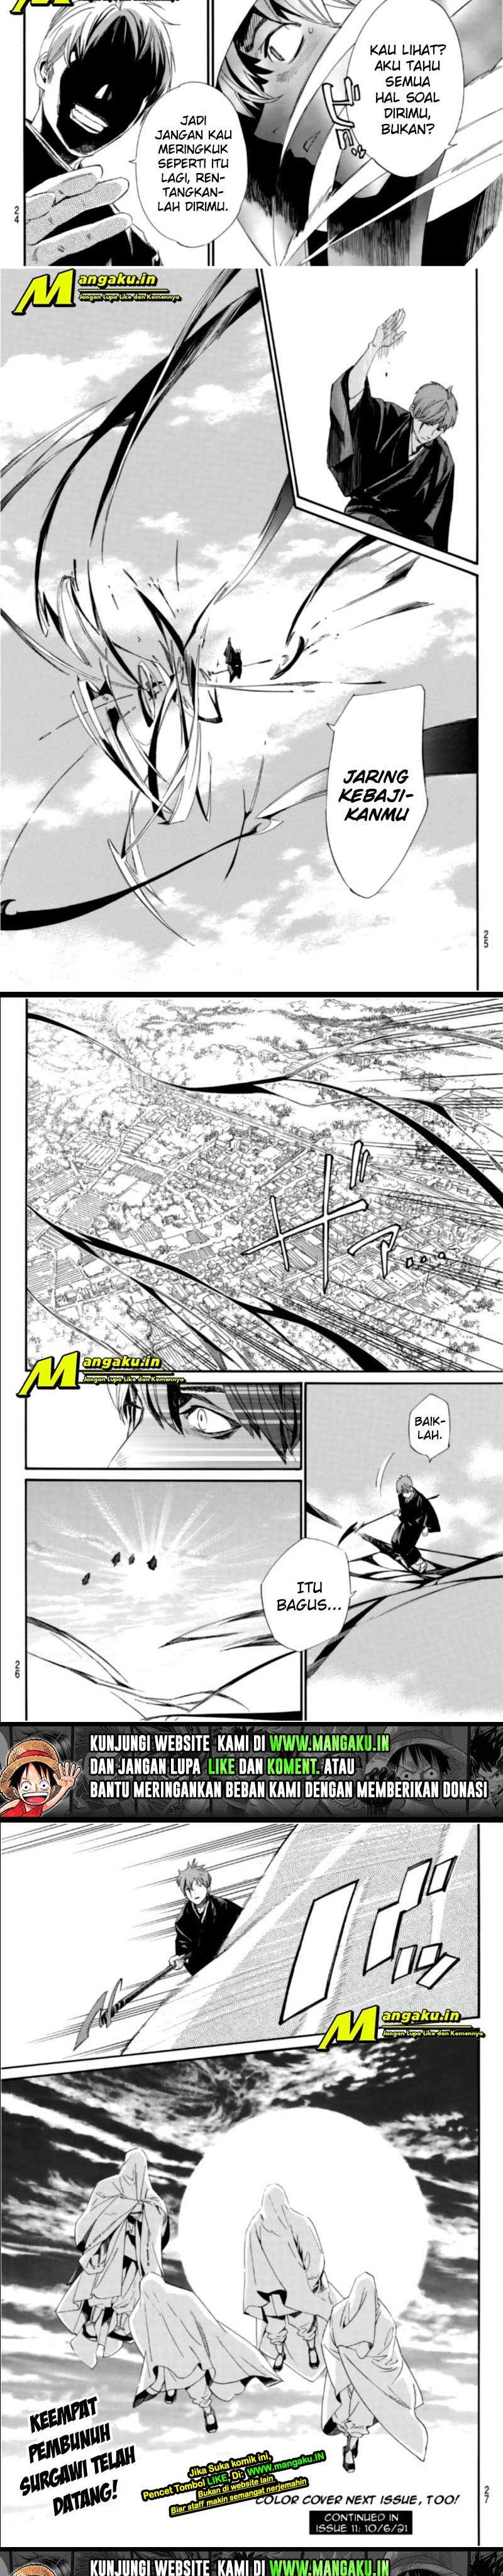 Noragami Chapter 96